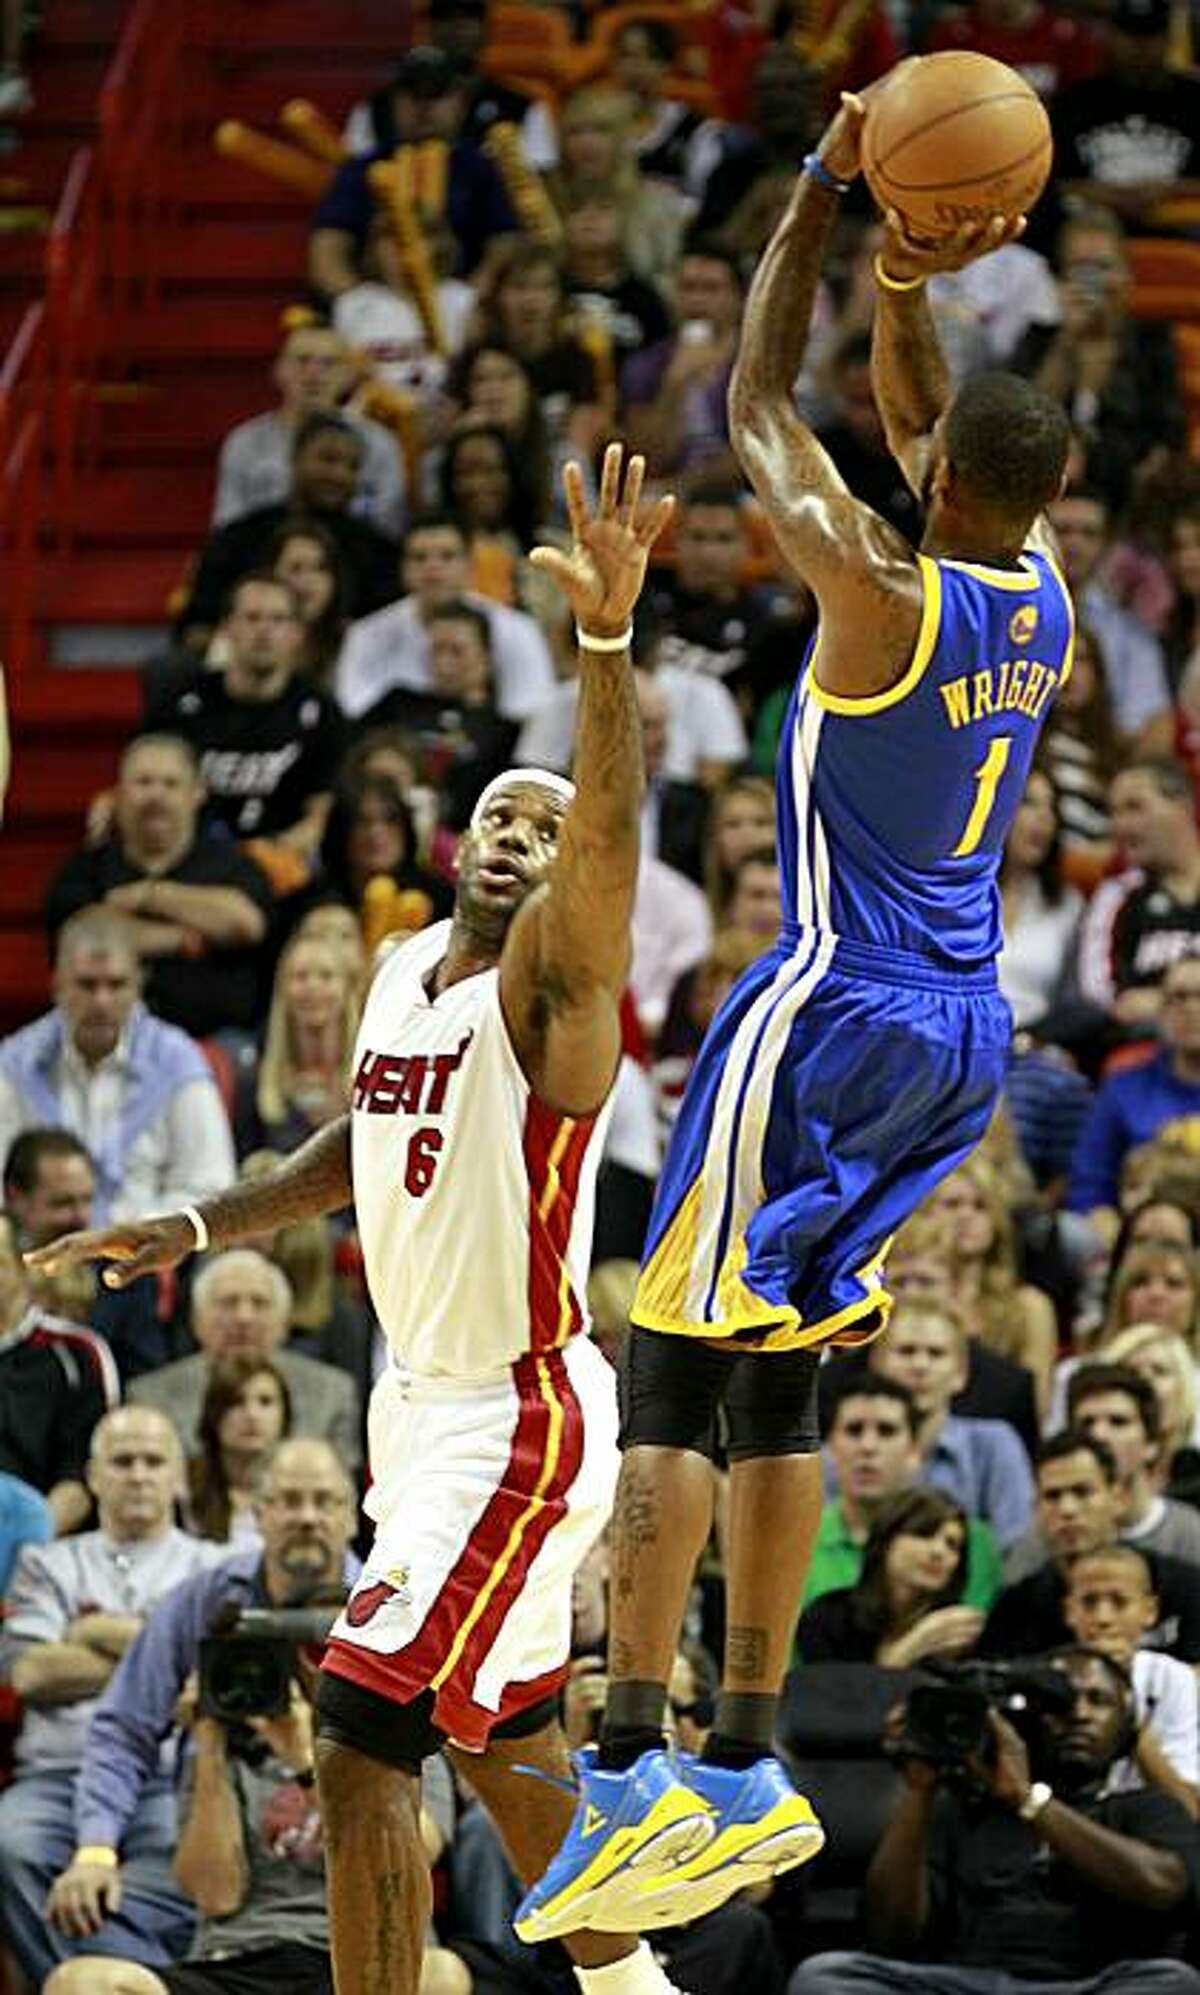 MIAMI, FL - JANUARY 01: Guard Dorell Wright #1 of the Golden State Warriors is defended by froward LeBron James #6 of the Miami Heat at American Airlines Arena on January 1, 2011 in Miami, Florida. NOTE TO USER: User expressly acknowledges and agrees that, by downloading and/or using this Photograph, User is consenting to the terms and conditions of the Getty Images License Agreement.